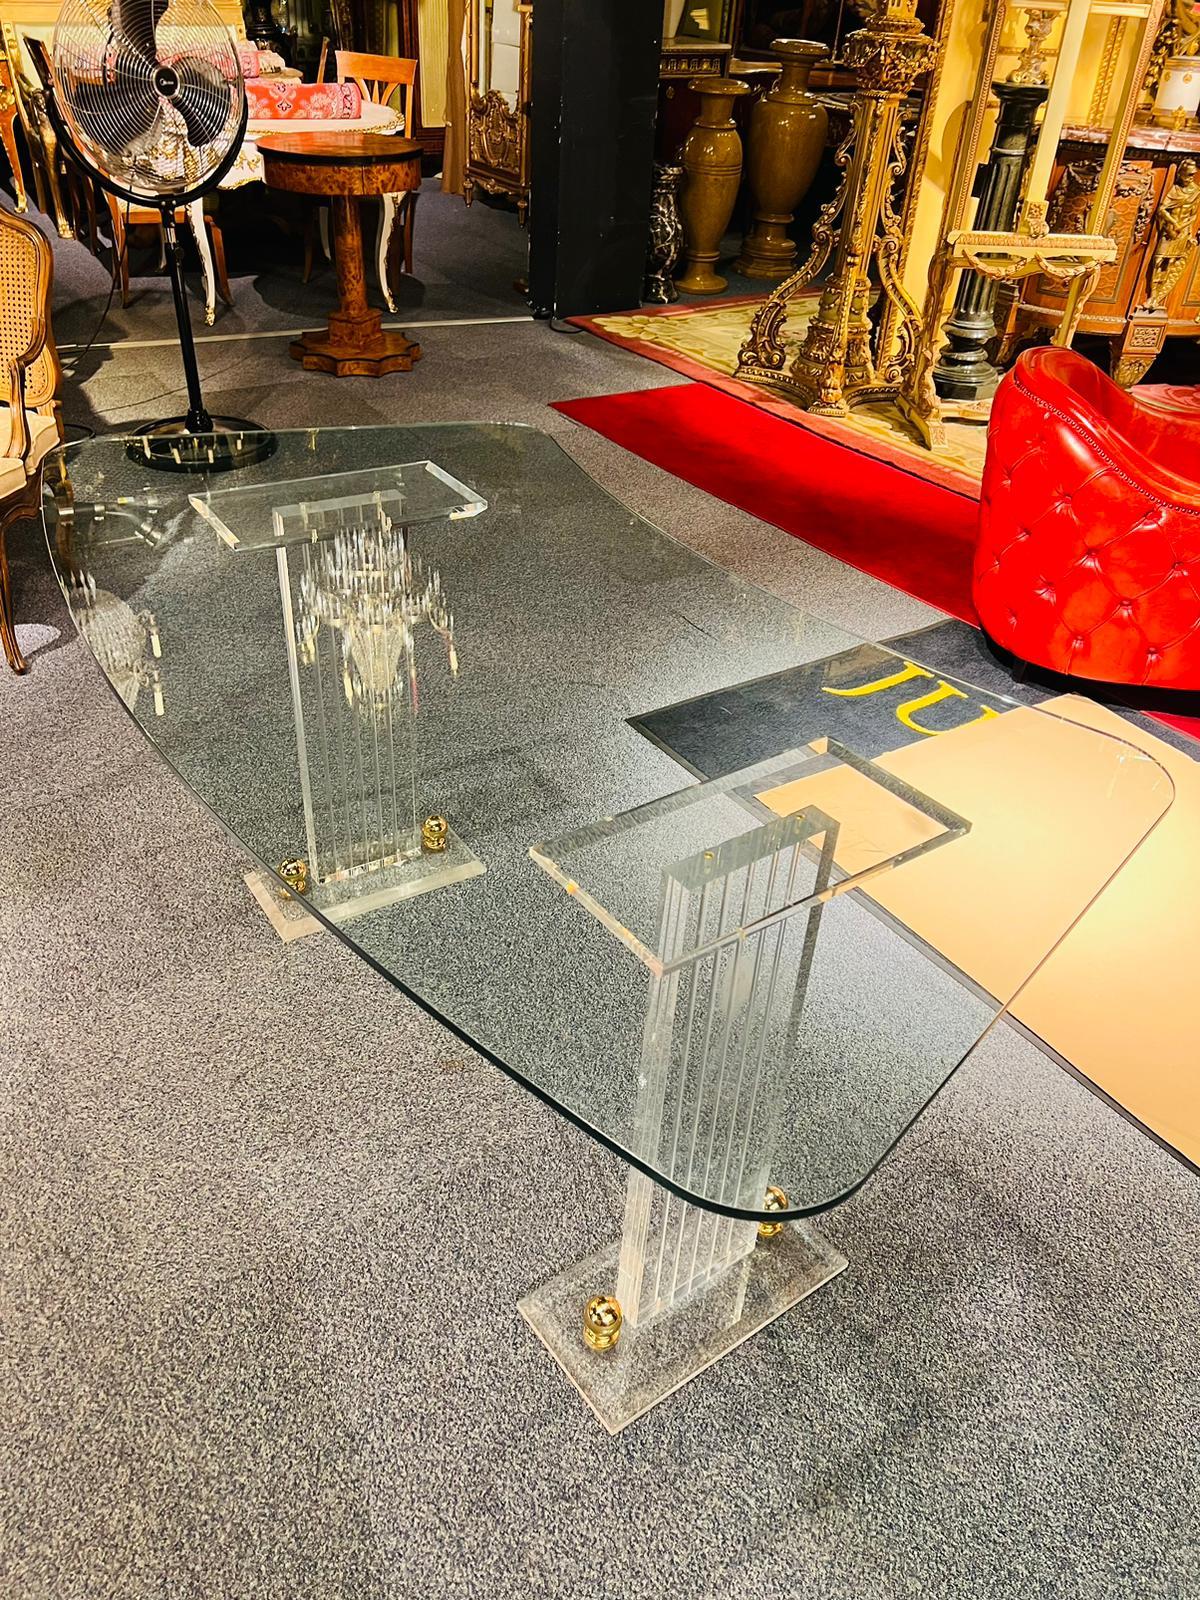 High Quality Acrylic Desk Stands on 2 Columns / Pillars with Massive Curved Top For Sale 2